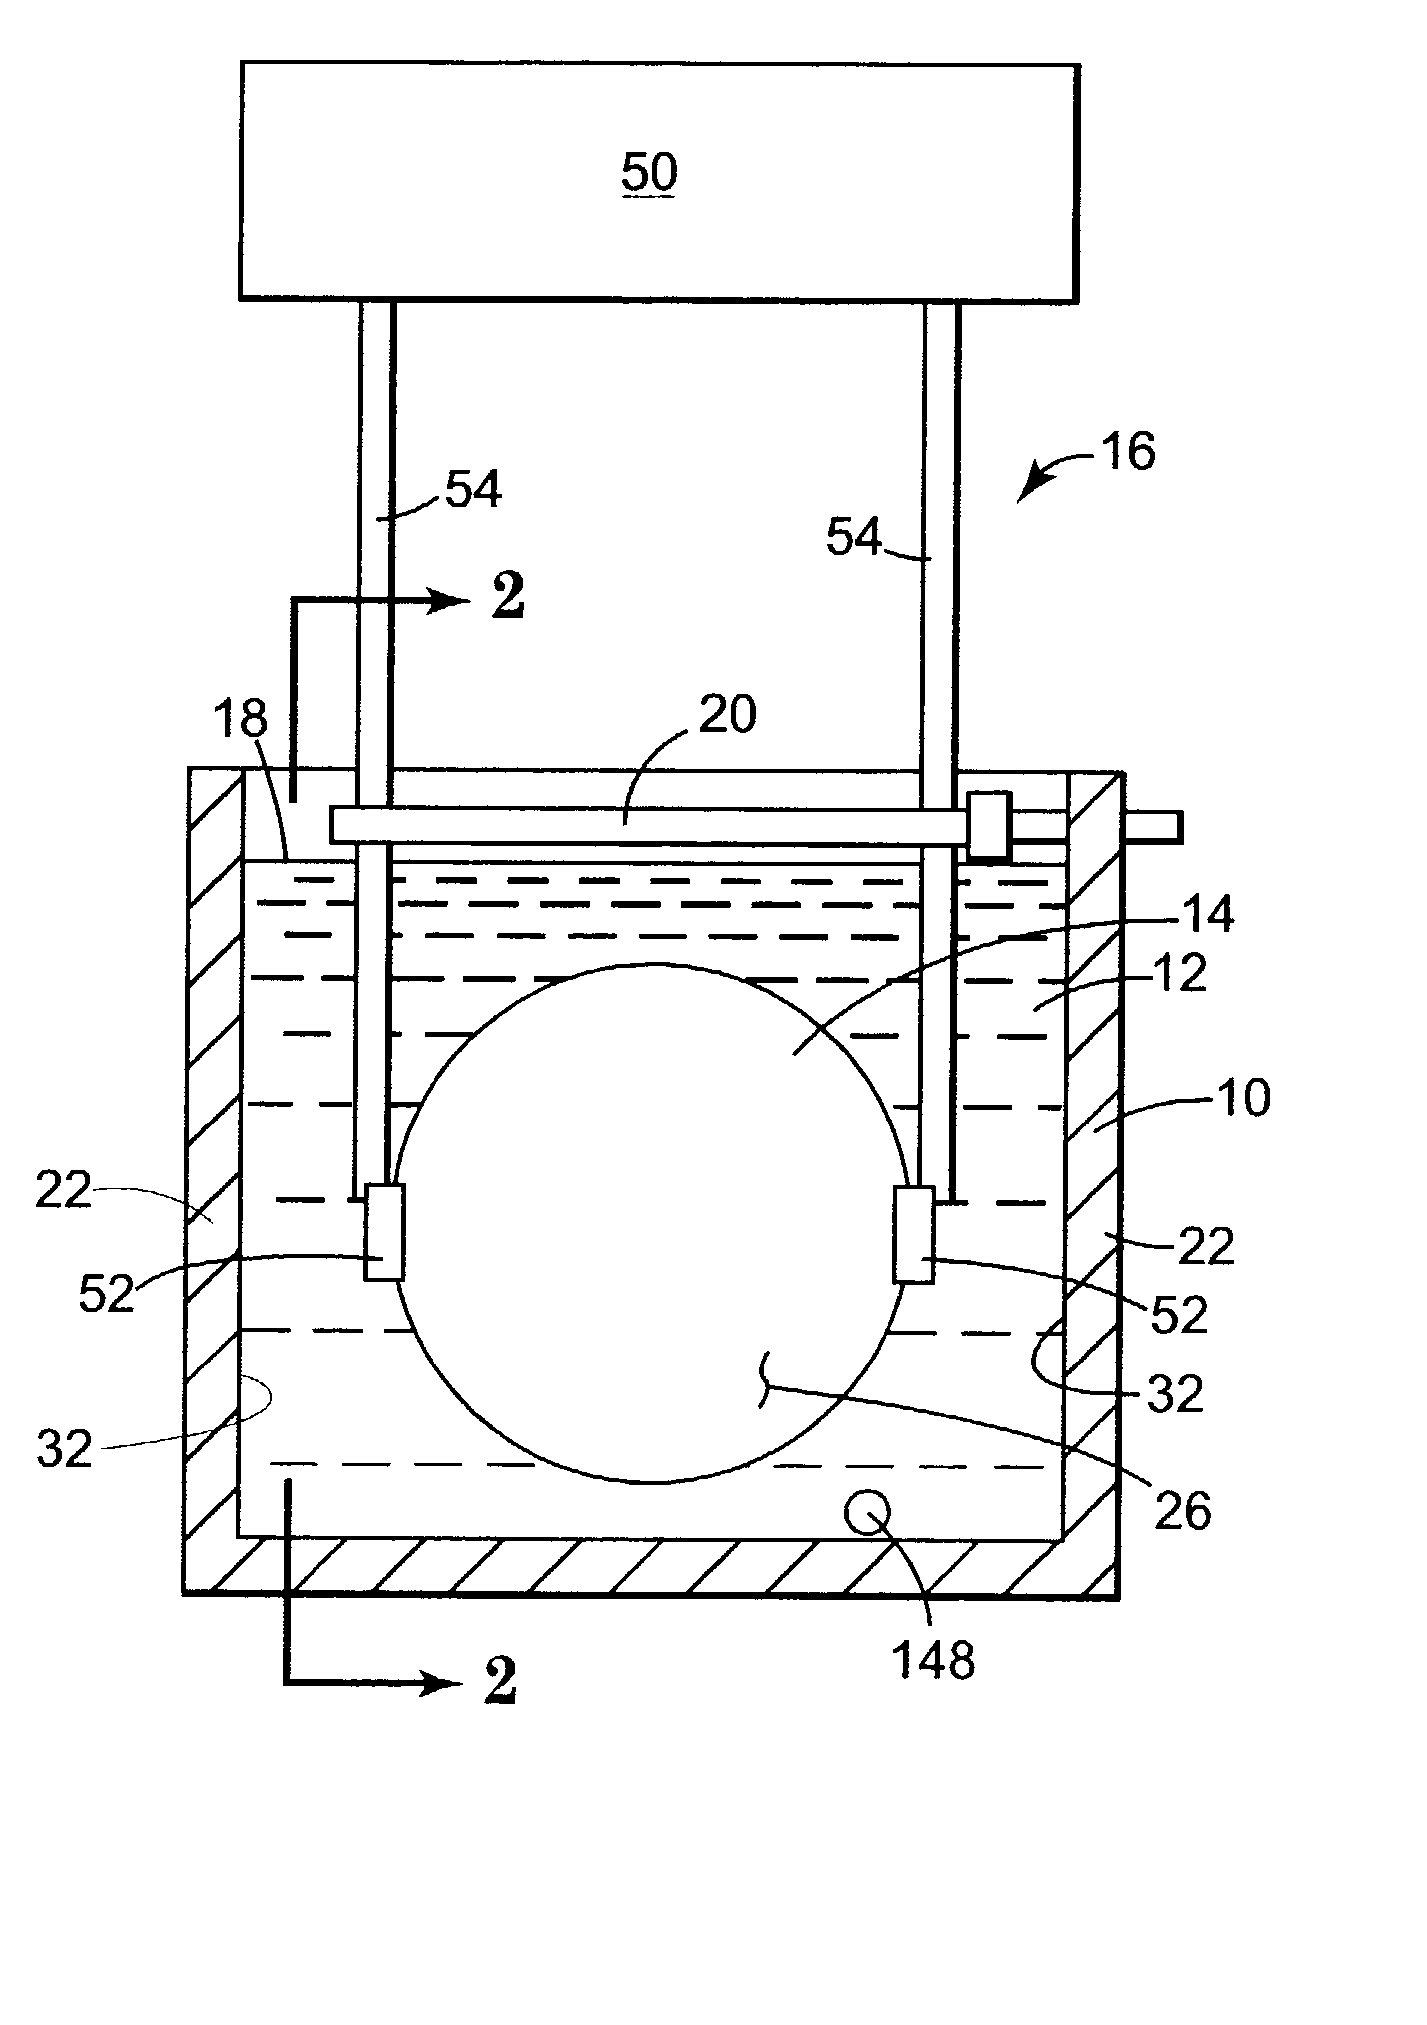 Semiconductor wafer cleaning systems and methods